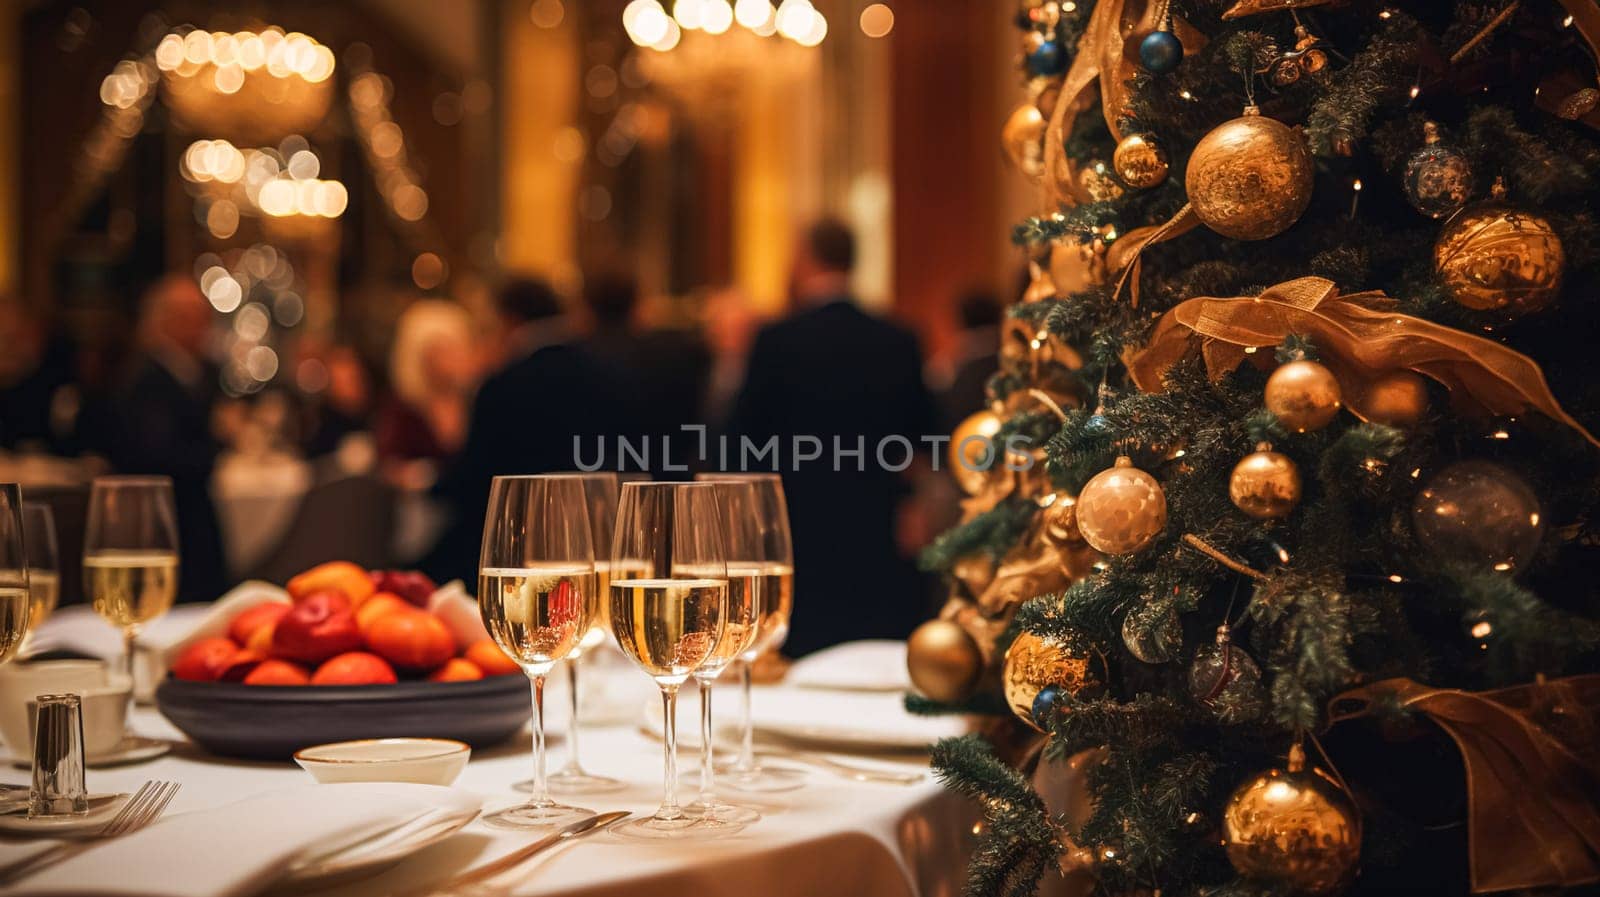 Christmas holidays and New Year celebration, dinner table and guests at a luxury English styled restaurant or hotel, Christmas tree decoration, holiday party and event invitation idea